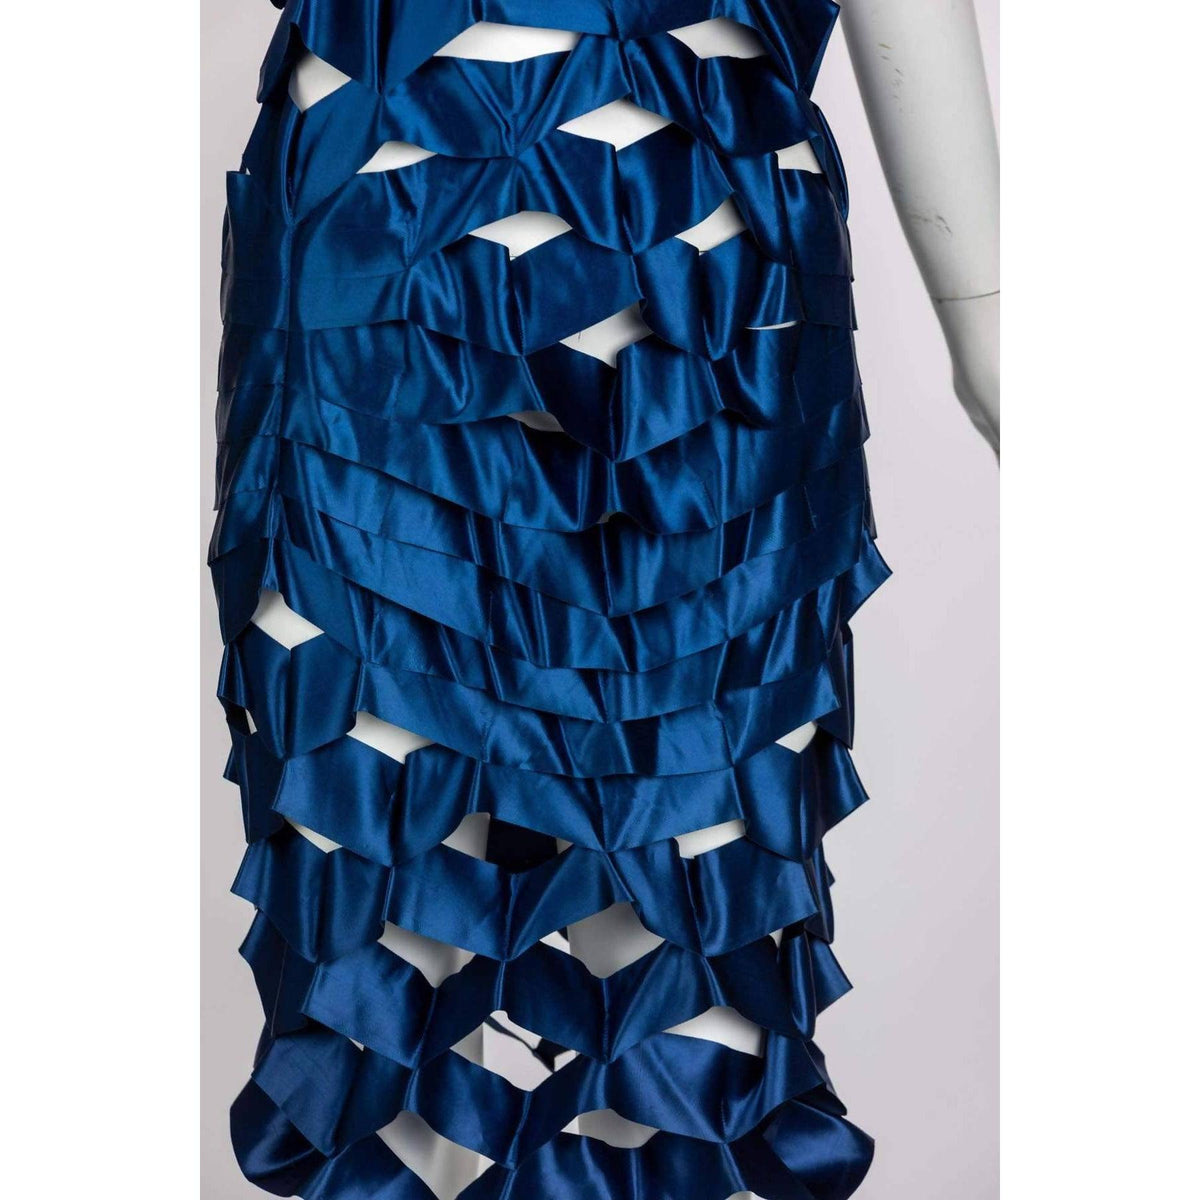 Pre-Owned ISSEY MIYAKE Blue Satin Ribbon Cage Dress | Size S - theREMODA